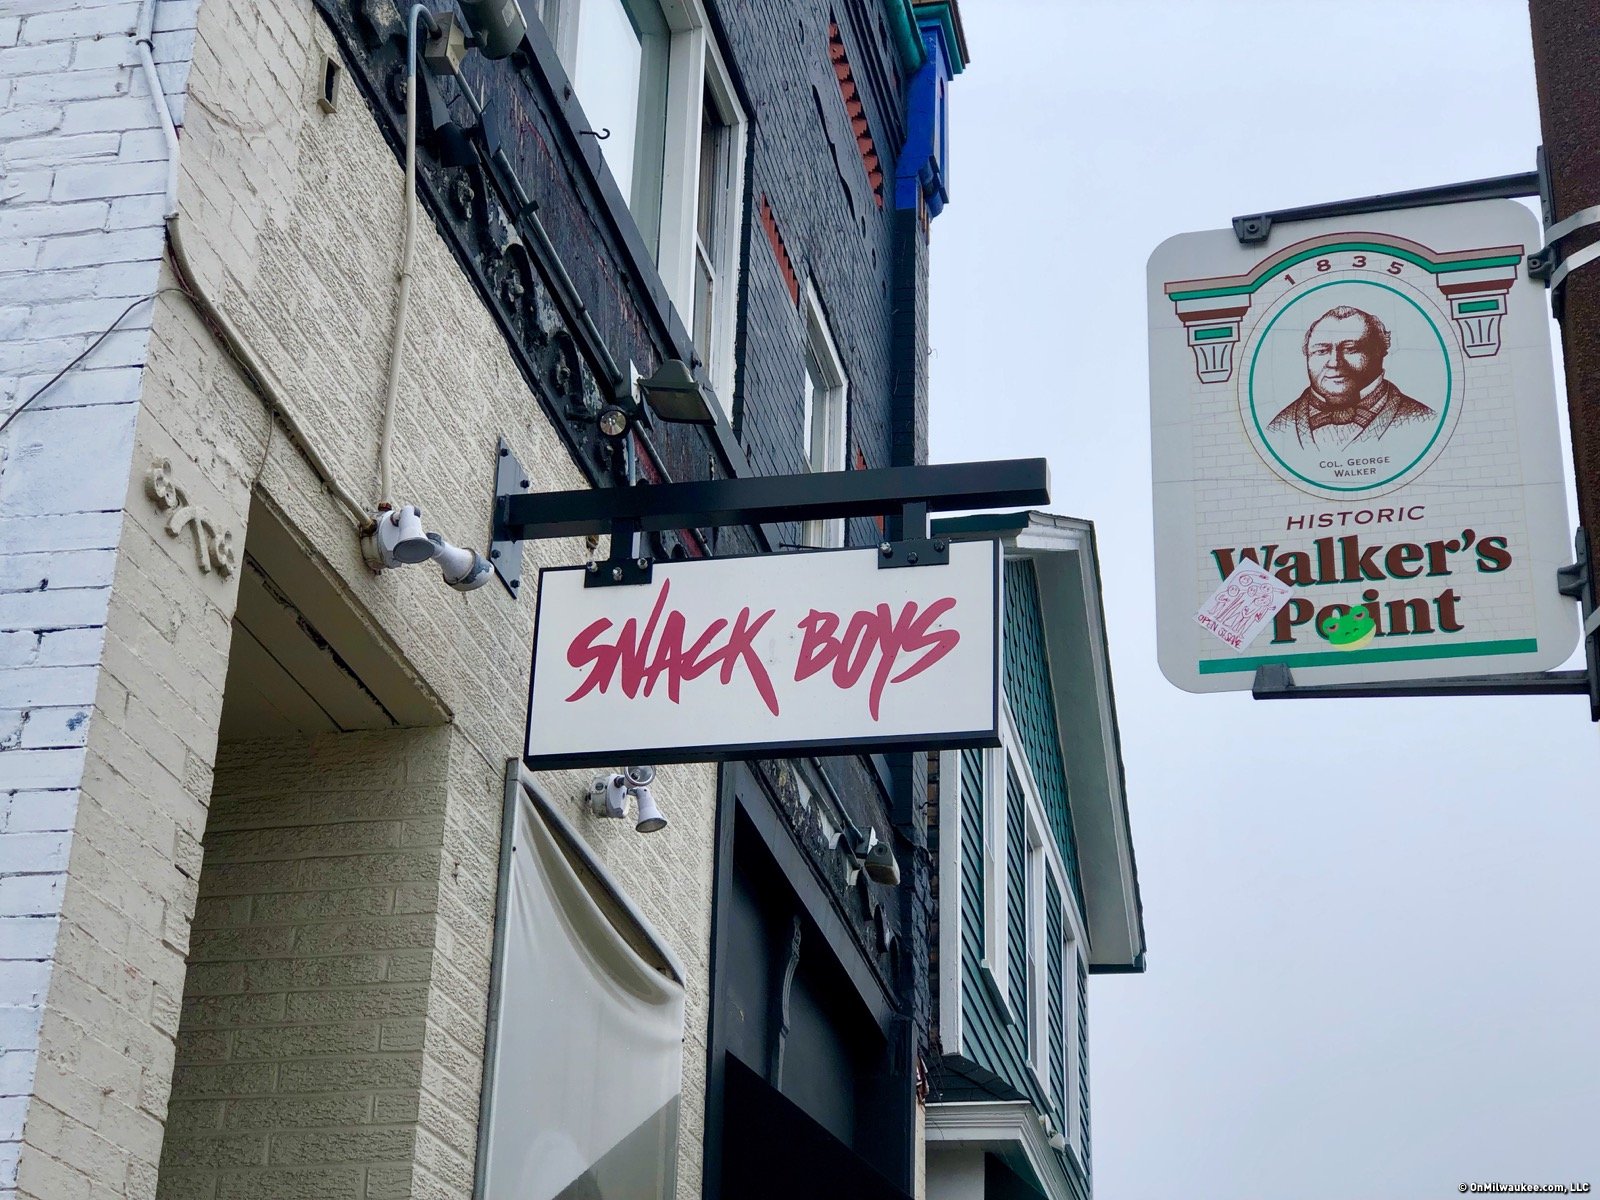 Snack Boys sets the magical March dates for their big move to the East Side